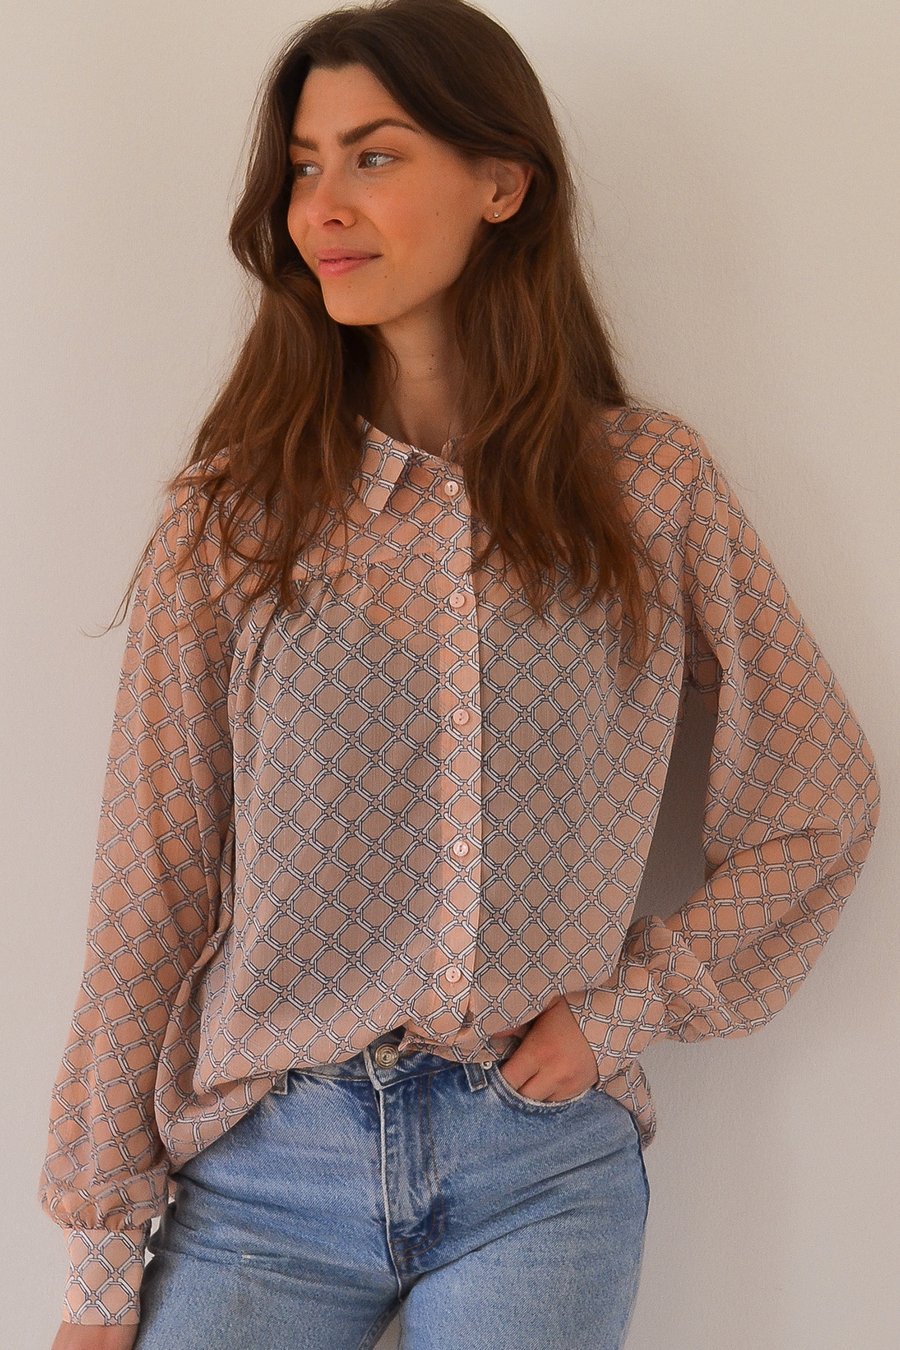 Lollys Laundry - dusty pink molly shirt